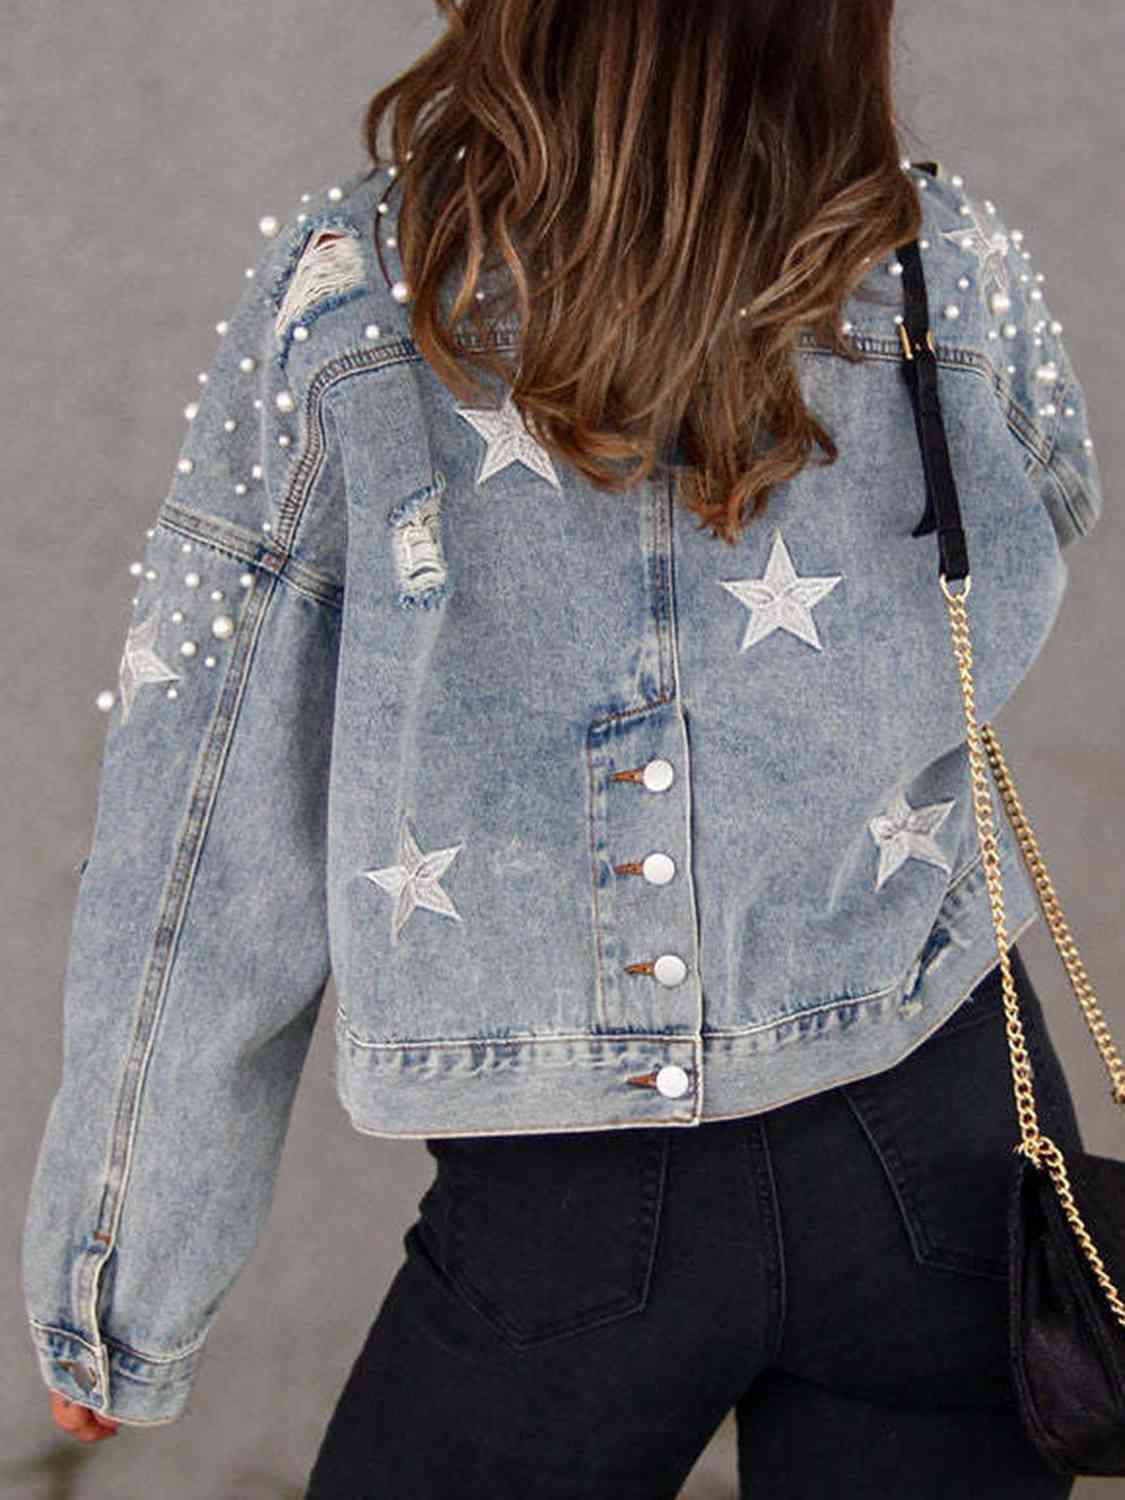 Punky's Pearl-Infused Denim Delight Jacket